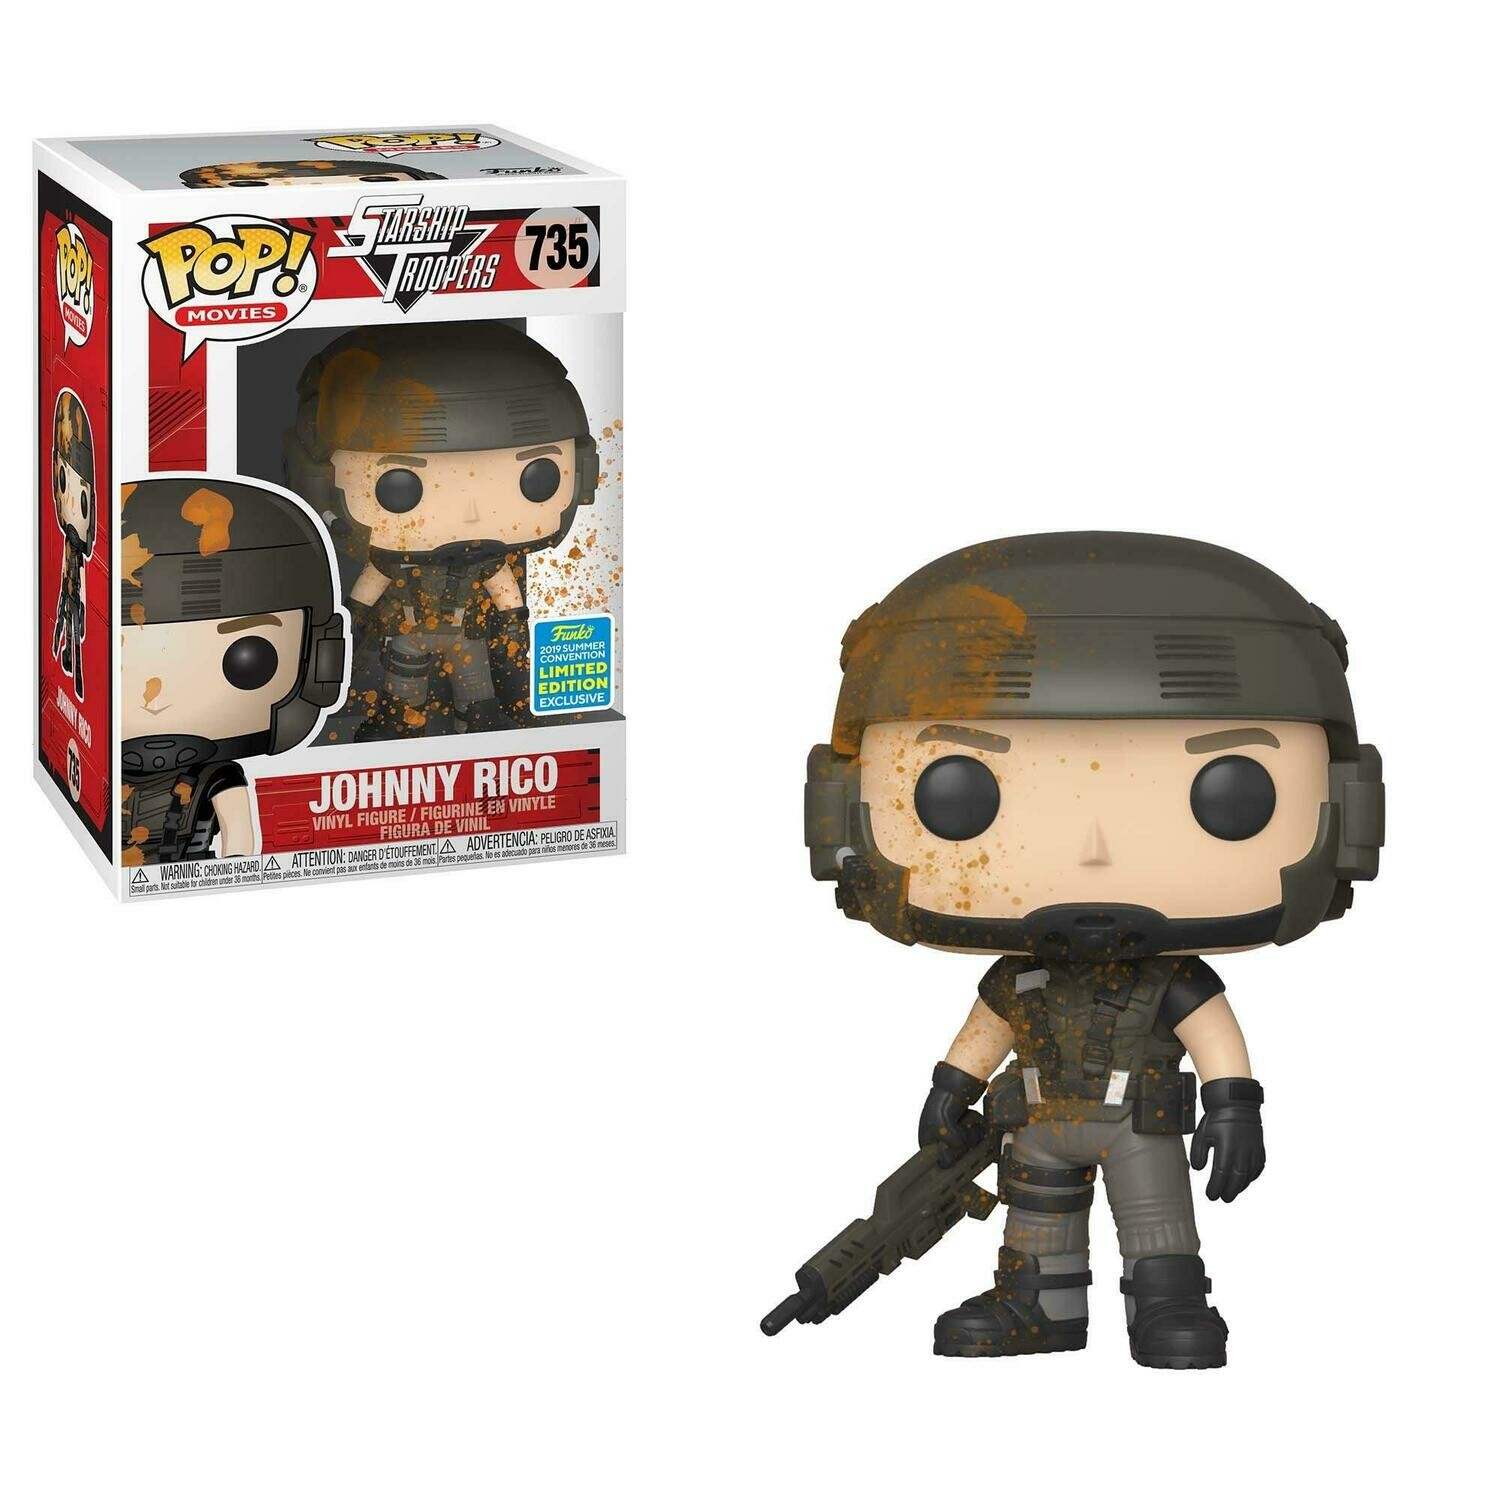 POP! Movies: Starship Troopers Johnny Rico Summer Convention 2019